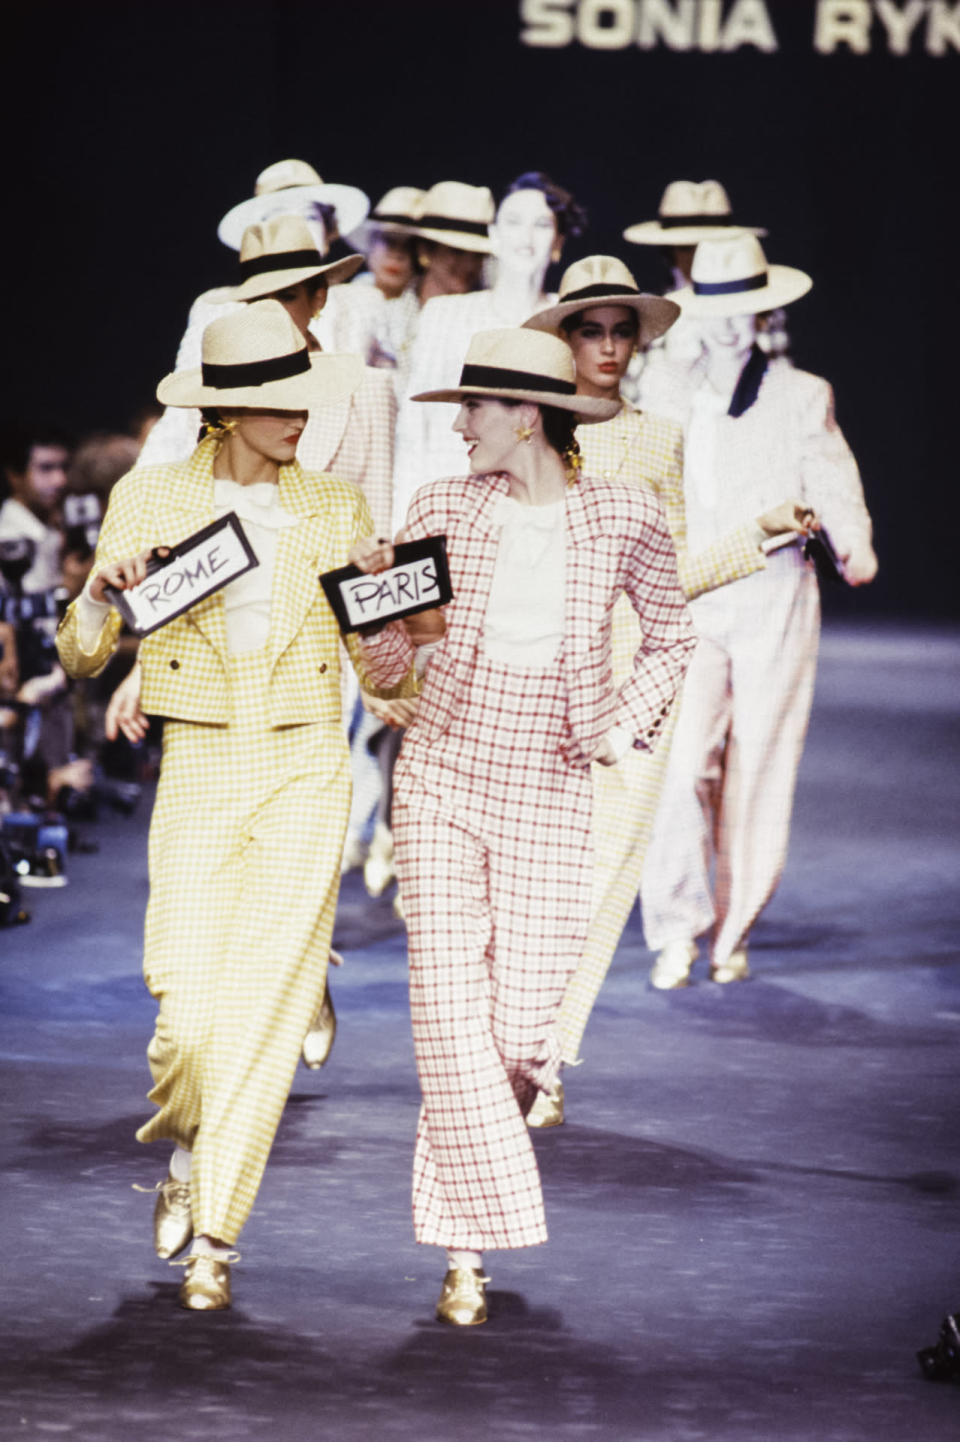 Models wear yellow and pink plaid suits at Sonia Rykiel’s spring 1988 show in Paris.